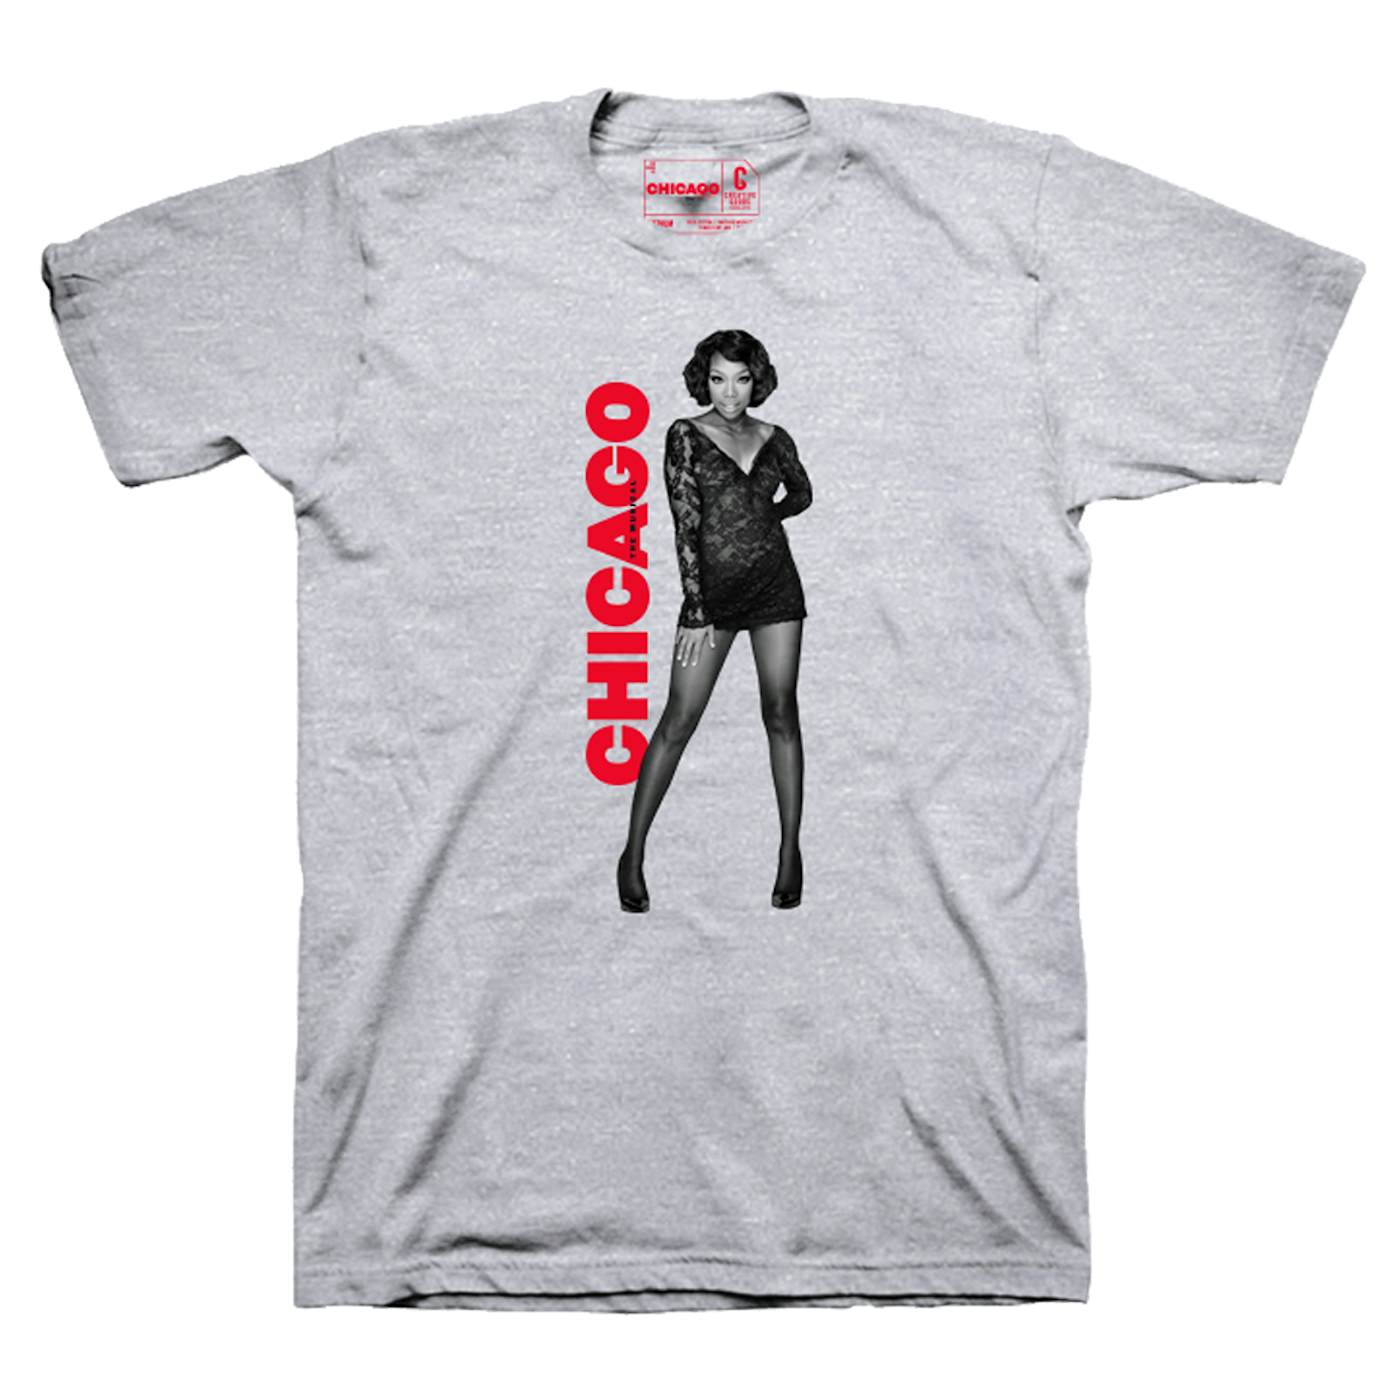 Chicago The Musical CHICAGO Brandy Tee